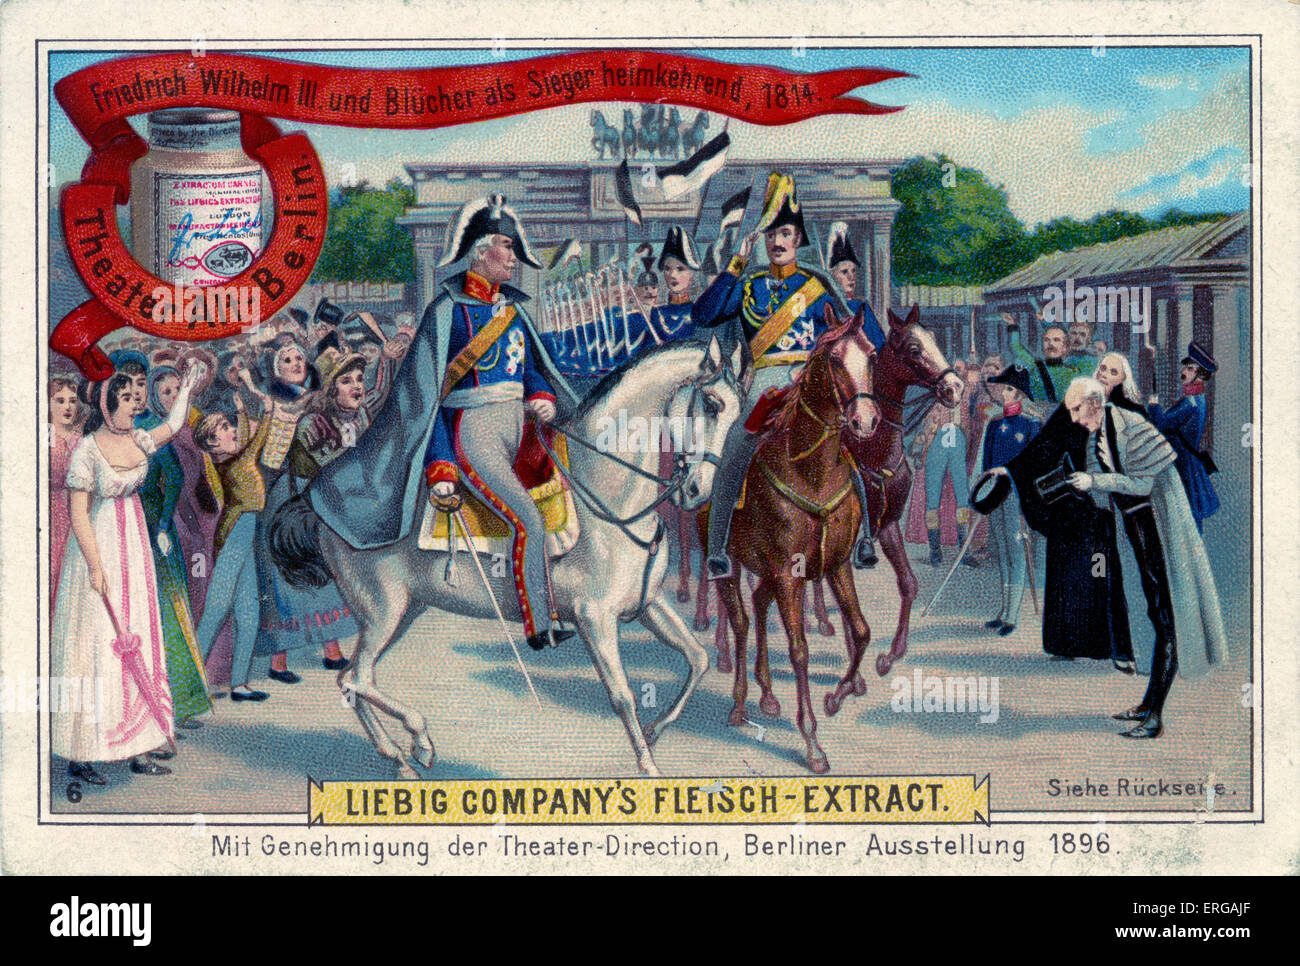 Friedrich Wilhelm III and General Blücher returning home after the victorious Battle of the Nations at Leipzig in 1813. Gebhard Leberecht von Blücher (16 December 1742 – 12 September 1819): victorious Prussian field marshal in Napoleonic Wars. From Liebig series: Teater Alt-Berlin, 1896, No 6. Stock Photo